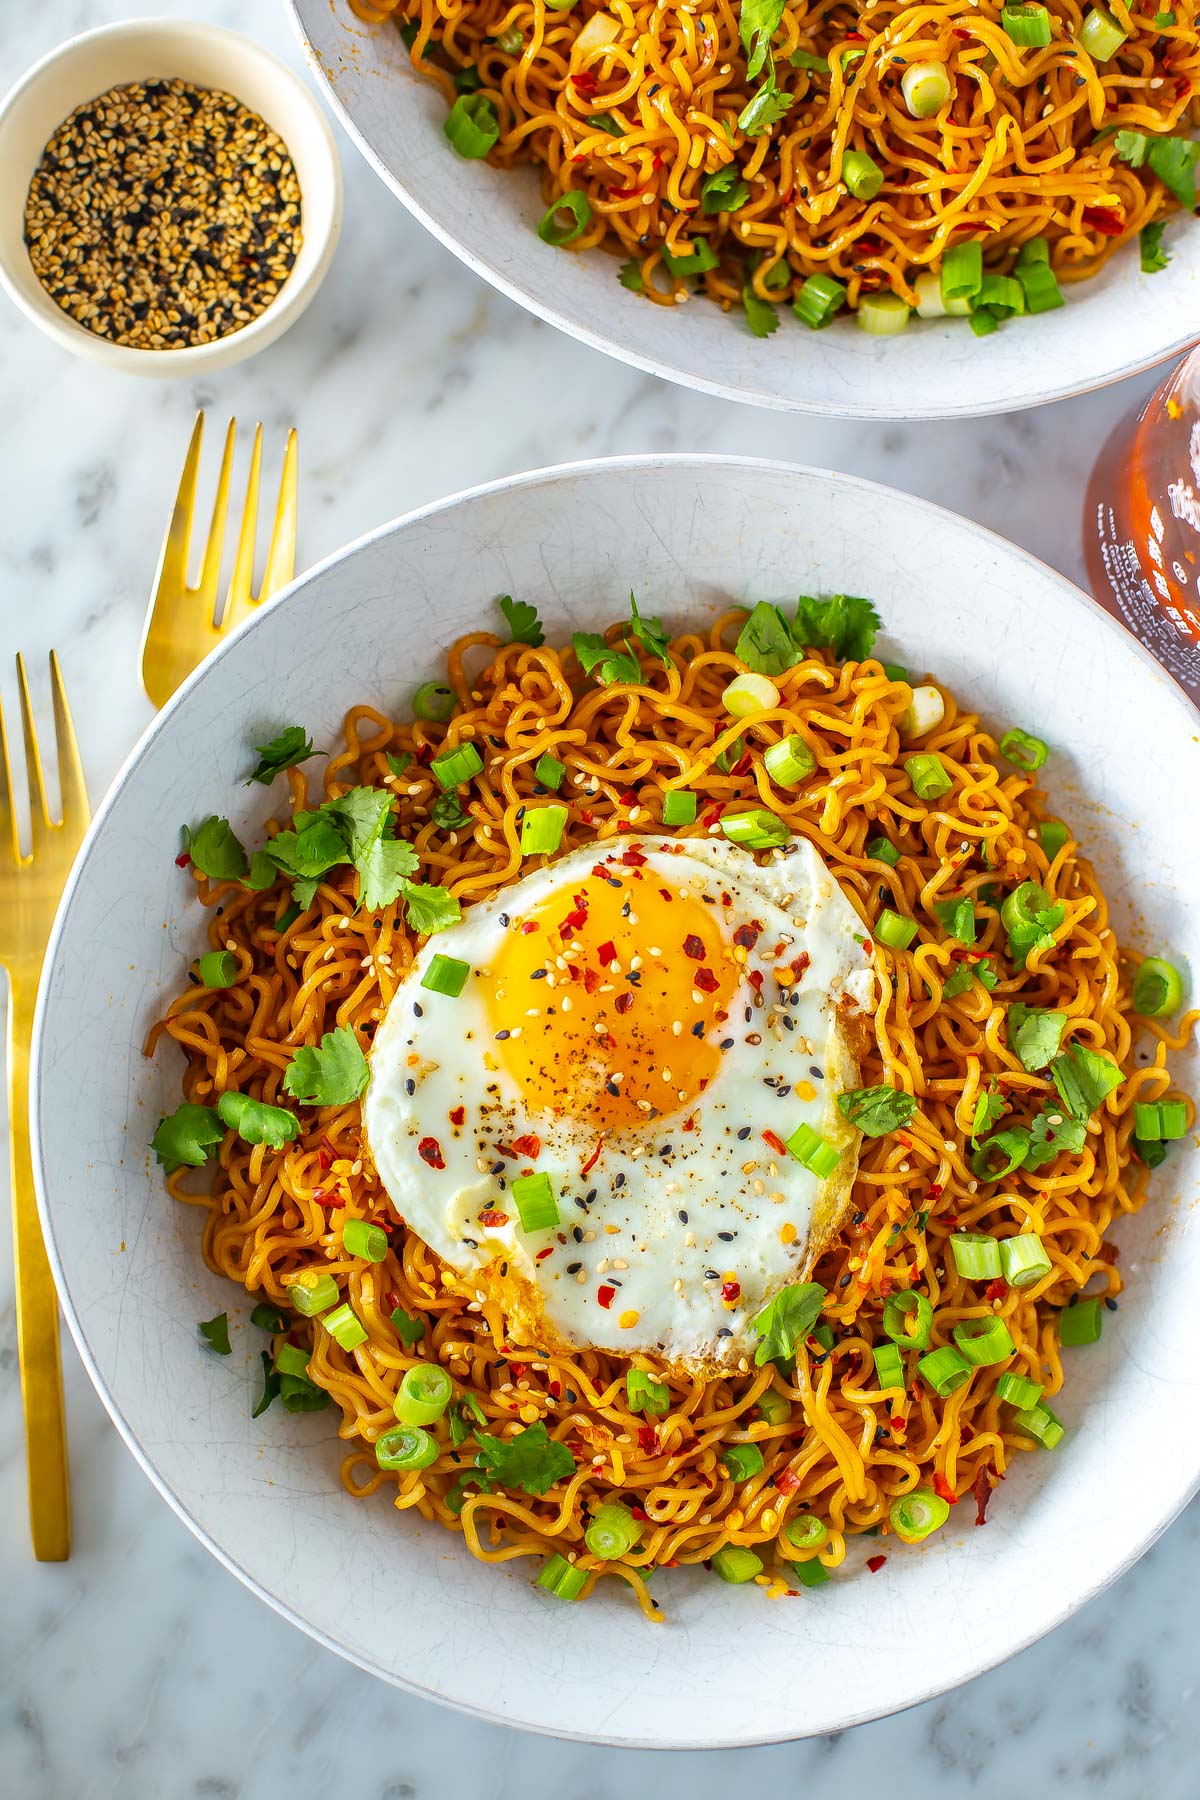 A close-up of a bowl of spicy noodles topped with a fried egg, green onions and cilantro.